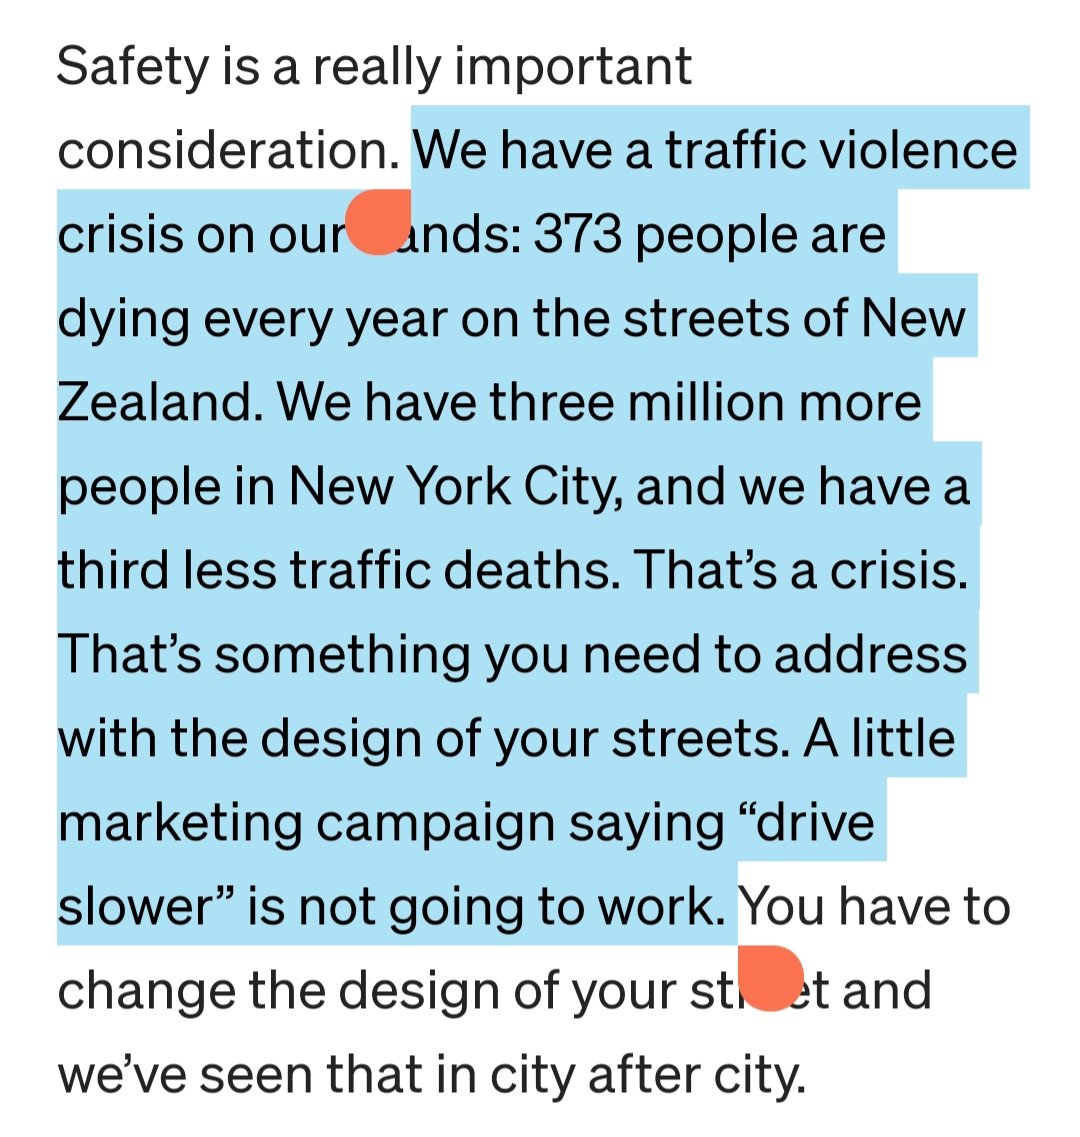 Physical traffic calming is better than a wee marketing campaign urging people to driver slower.